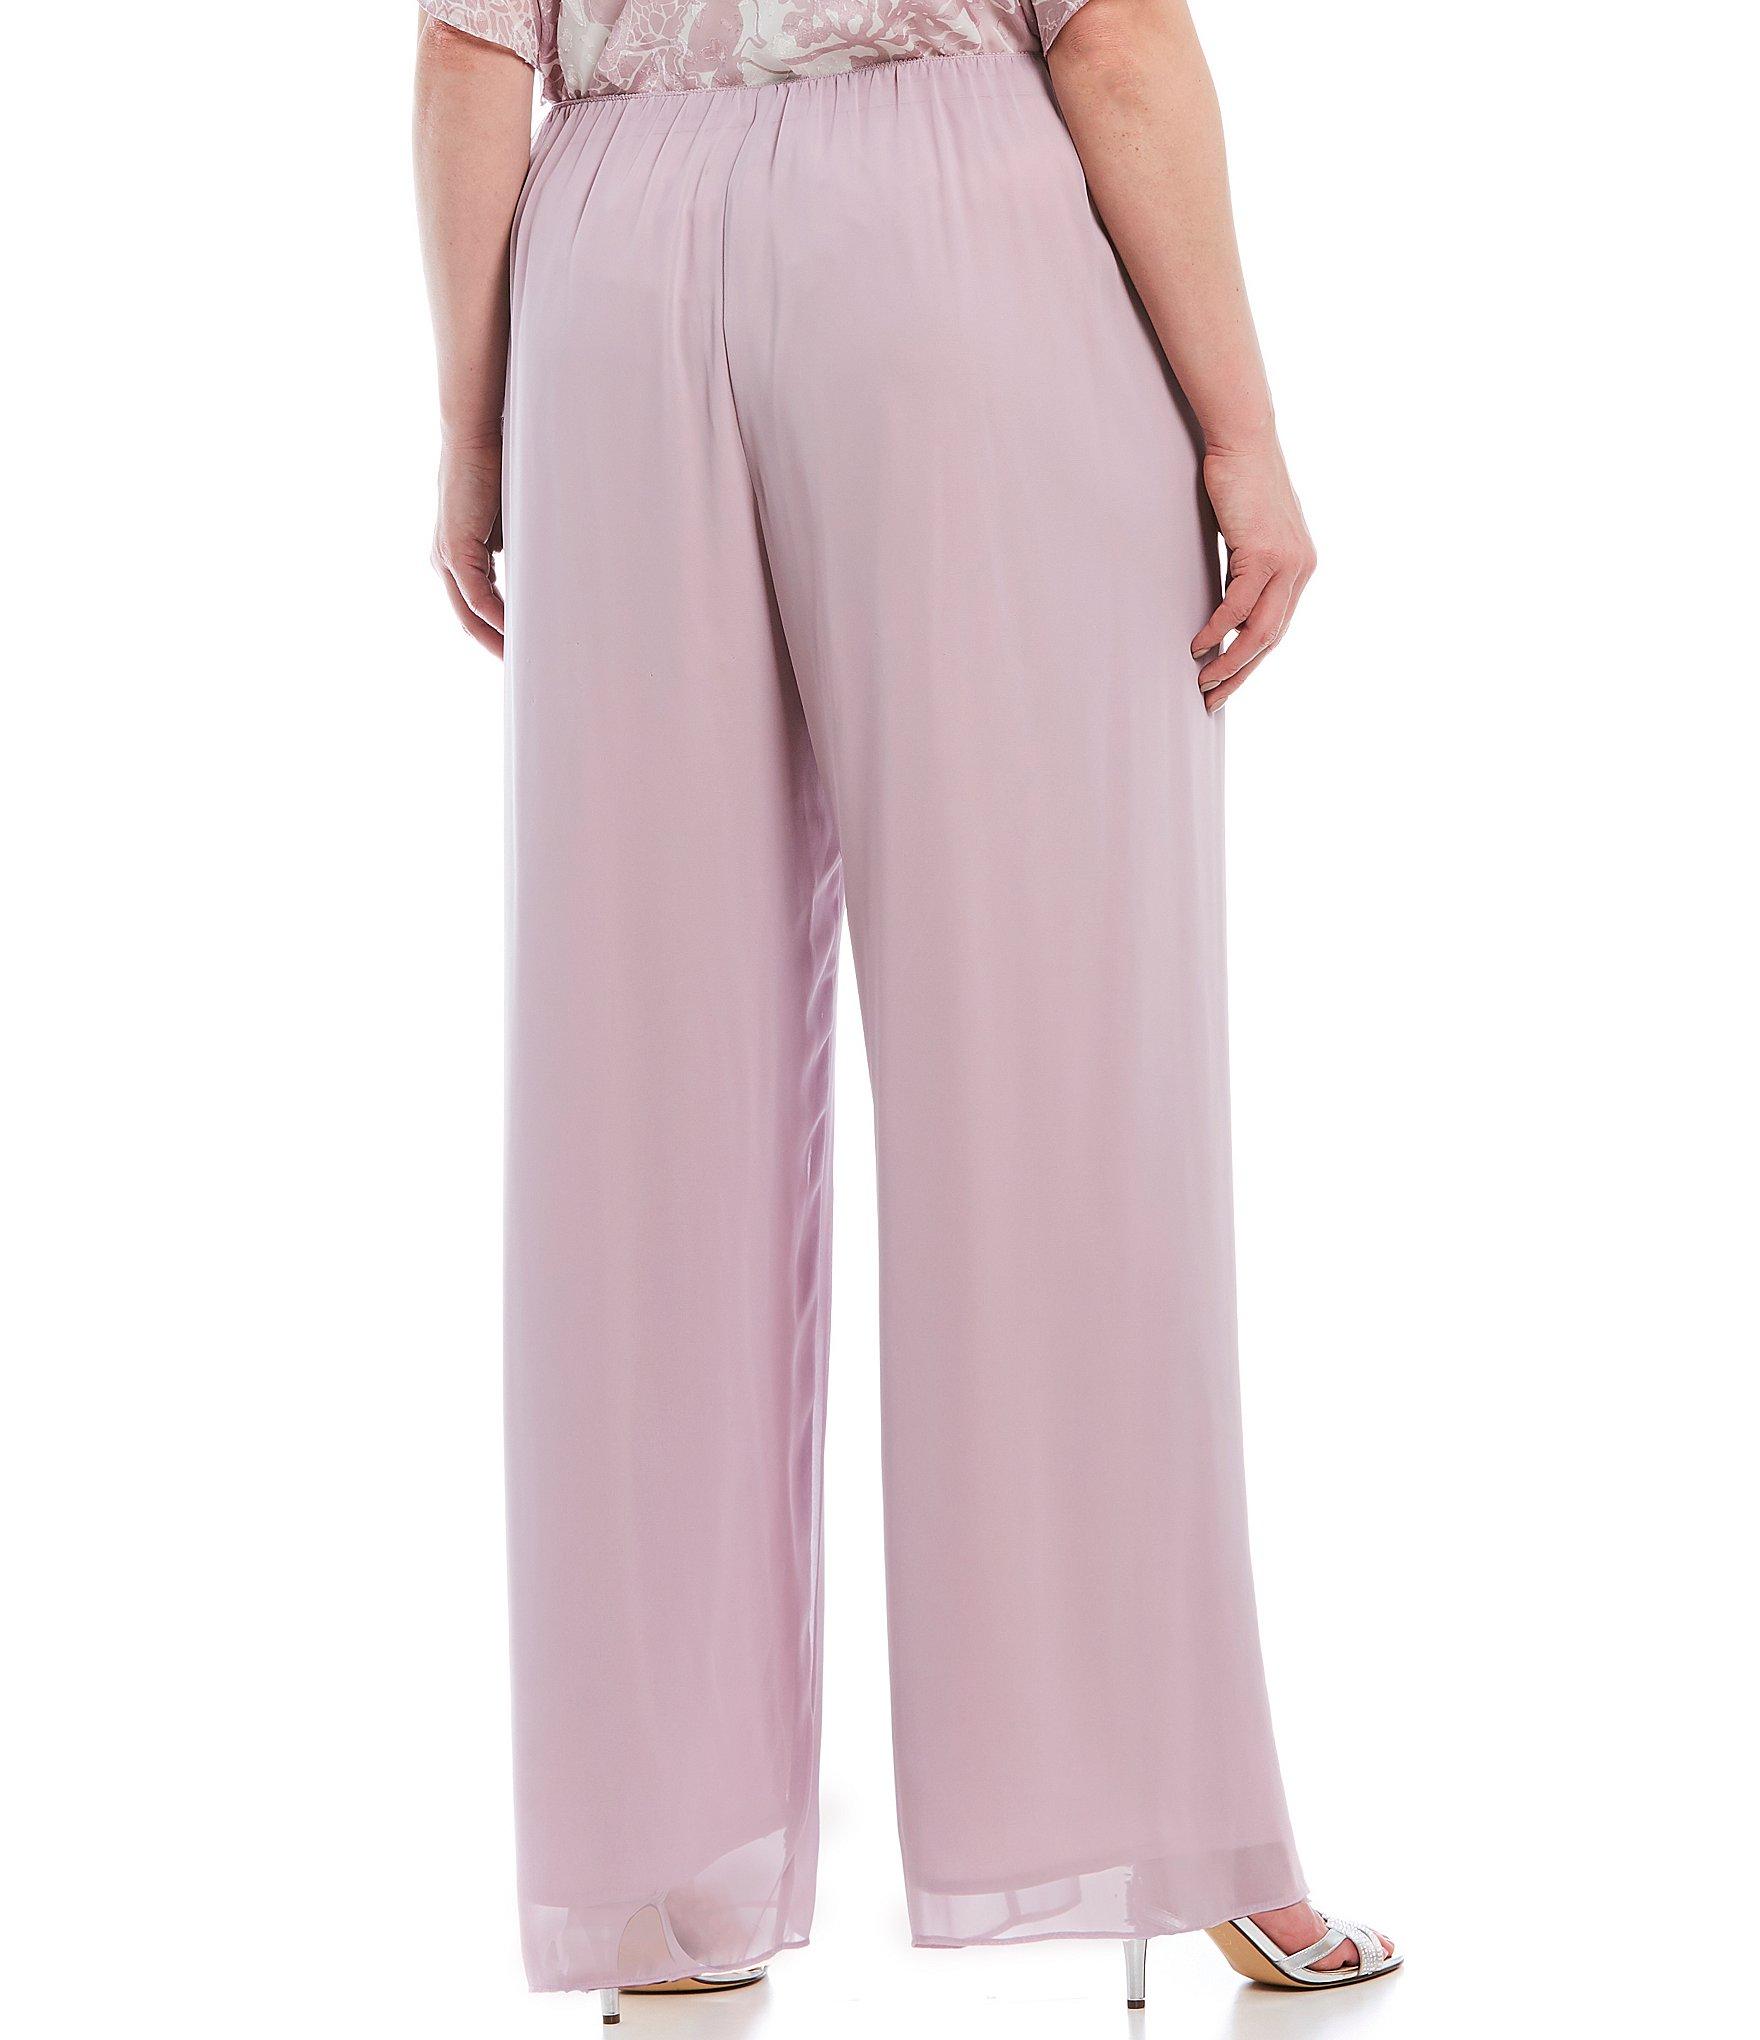 Alex Evenings Plus Size Wide Leg Pull-on Pant in Pink - Lyst